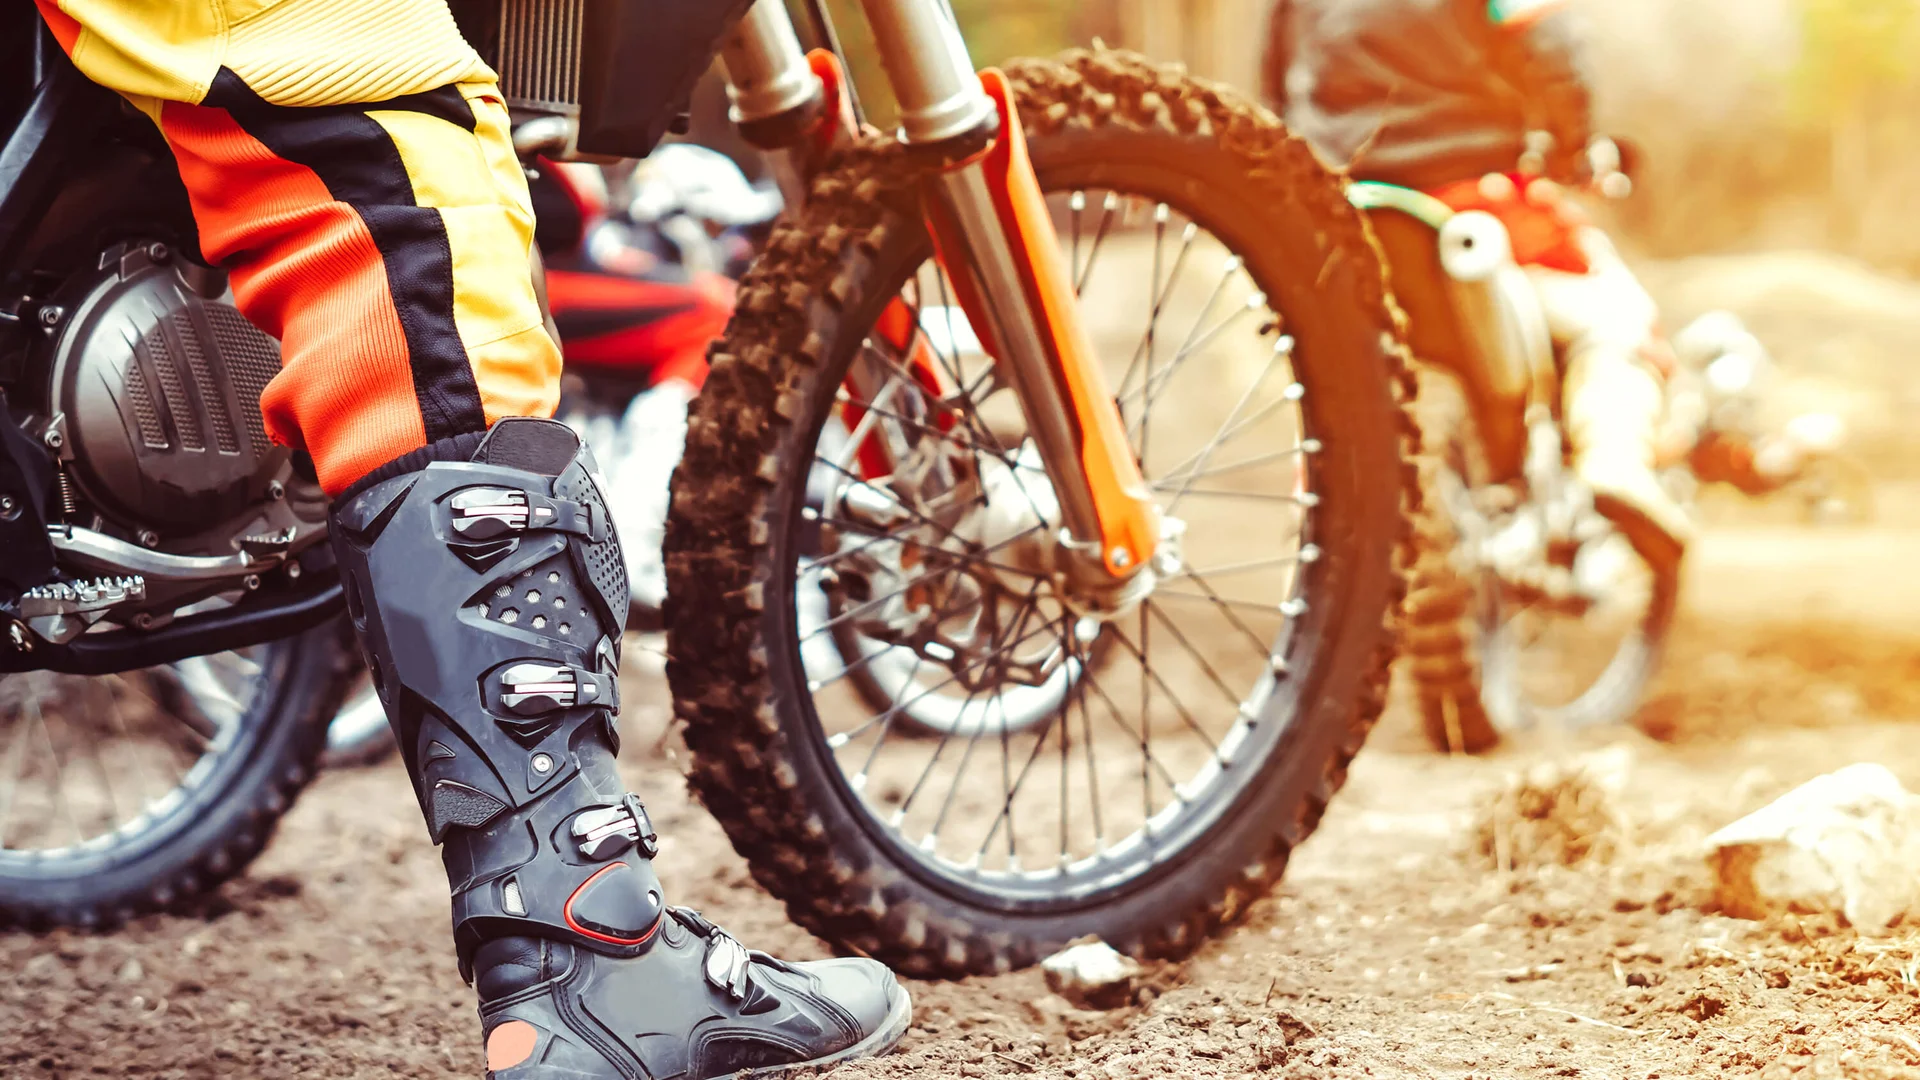 person riding motorcycle showing offroad boots